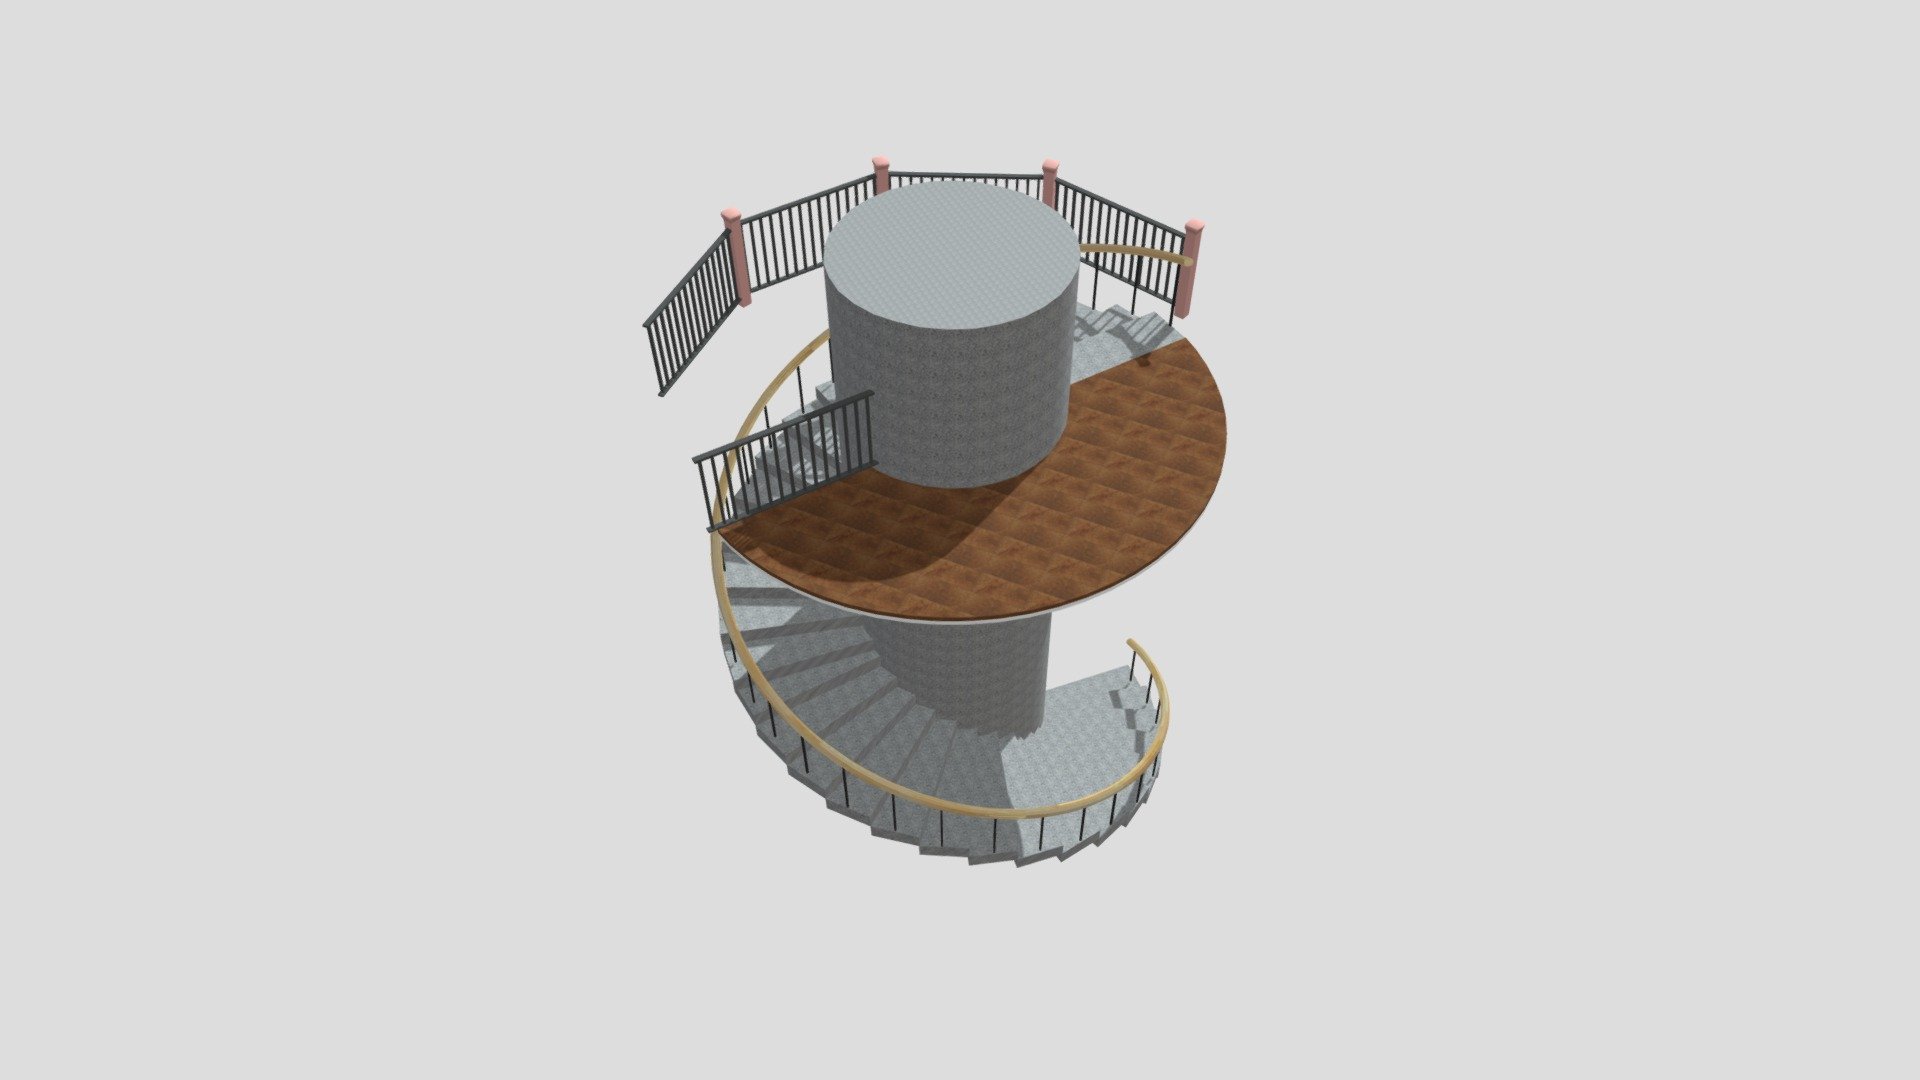 Stair Circulair
Made with SH3D - Stair Circulair - 3D model by FD-paffie 3d model